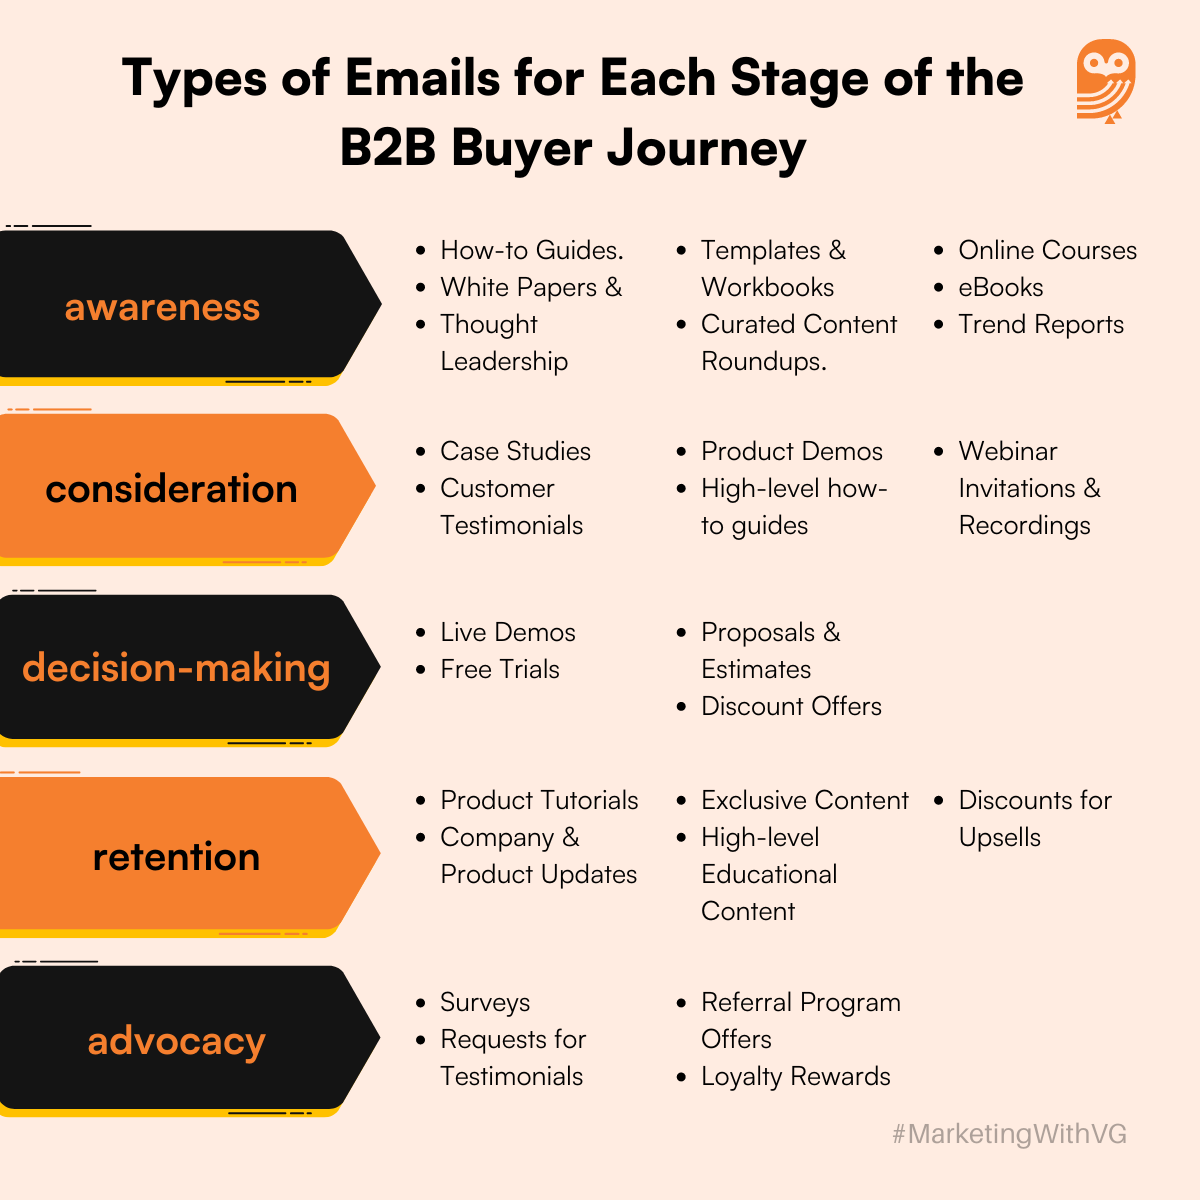 Types of Emails for Each Stage of the B2B Buyer Journey